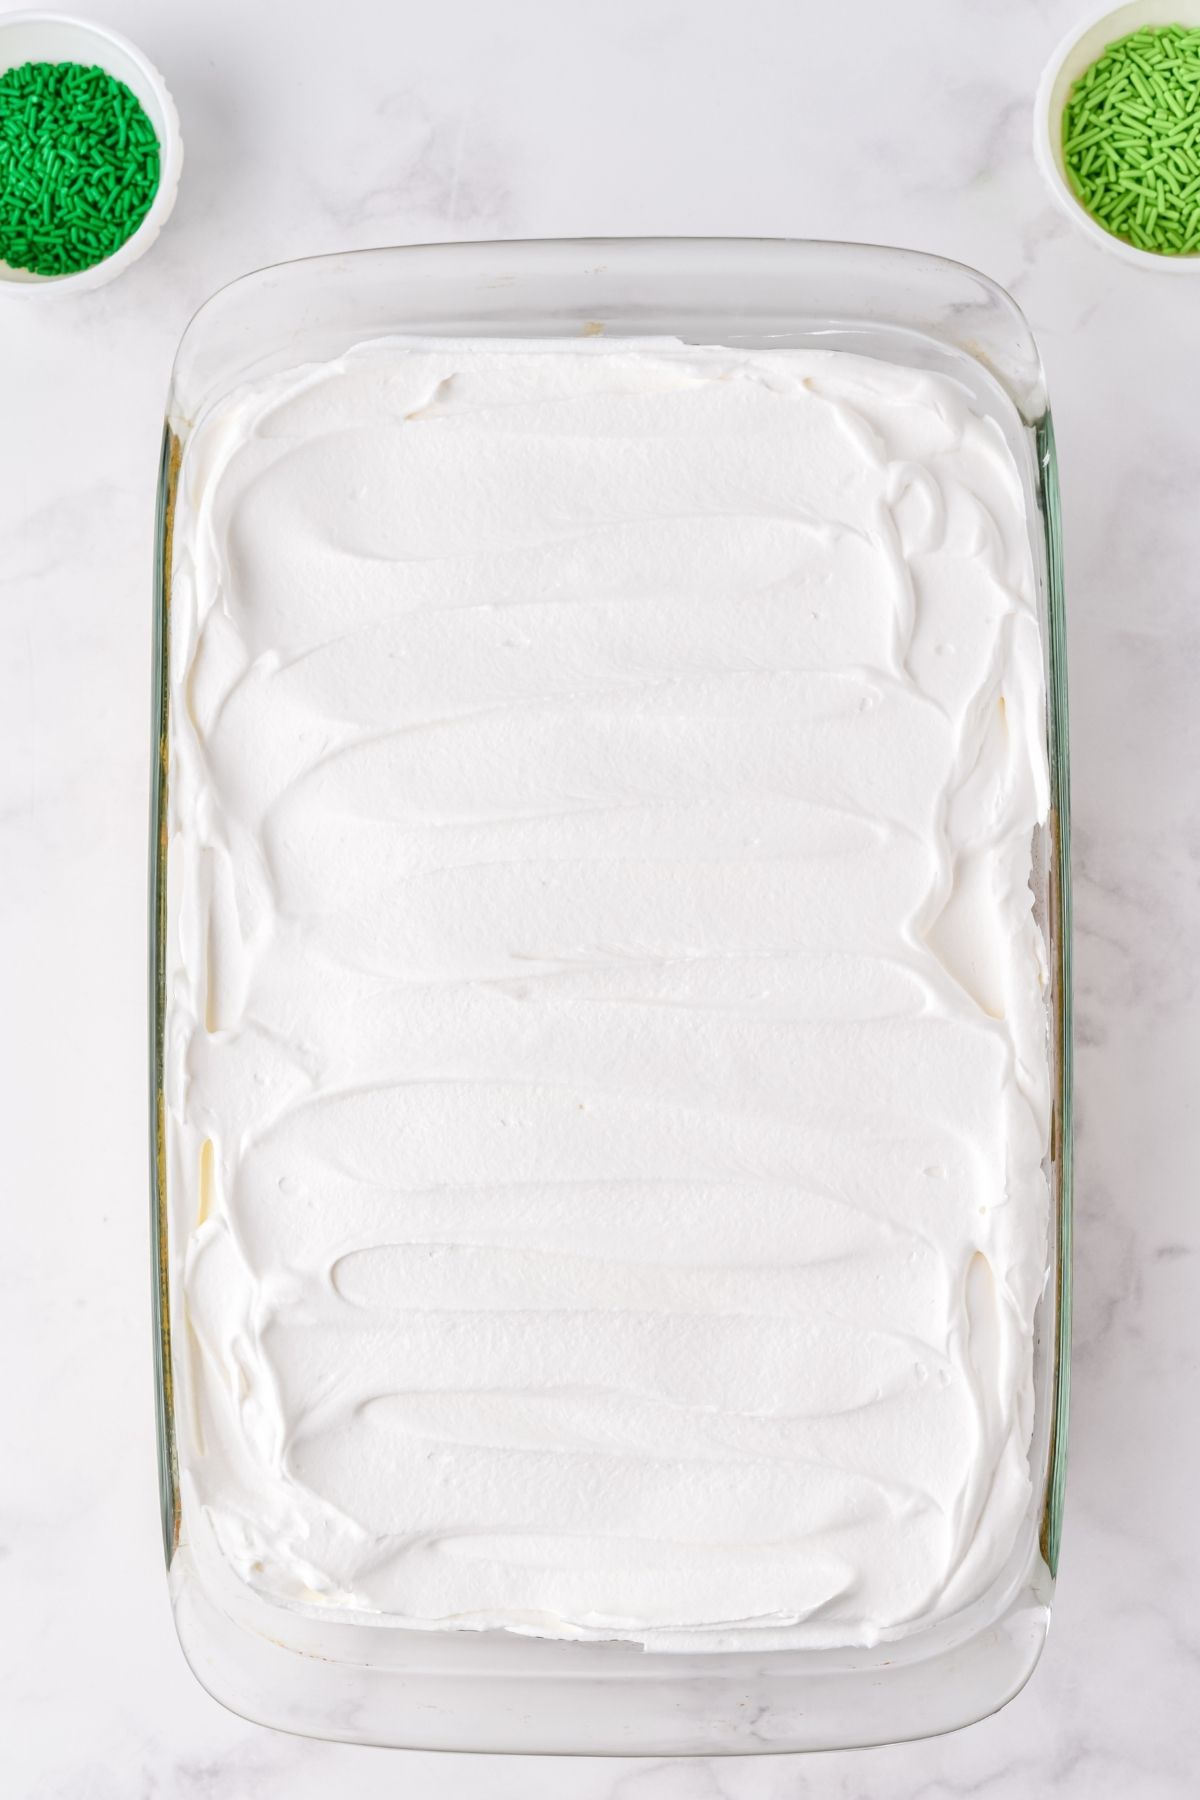 whipped topping spread on top of cake